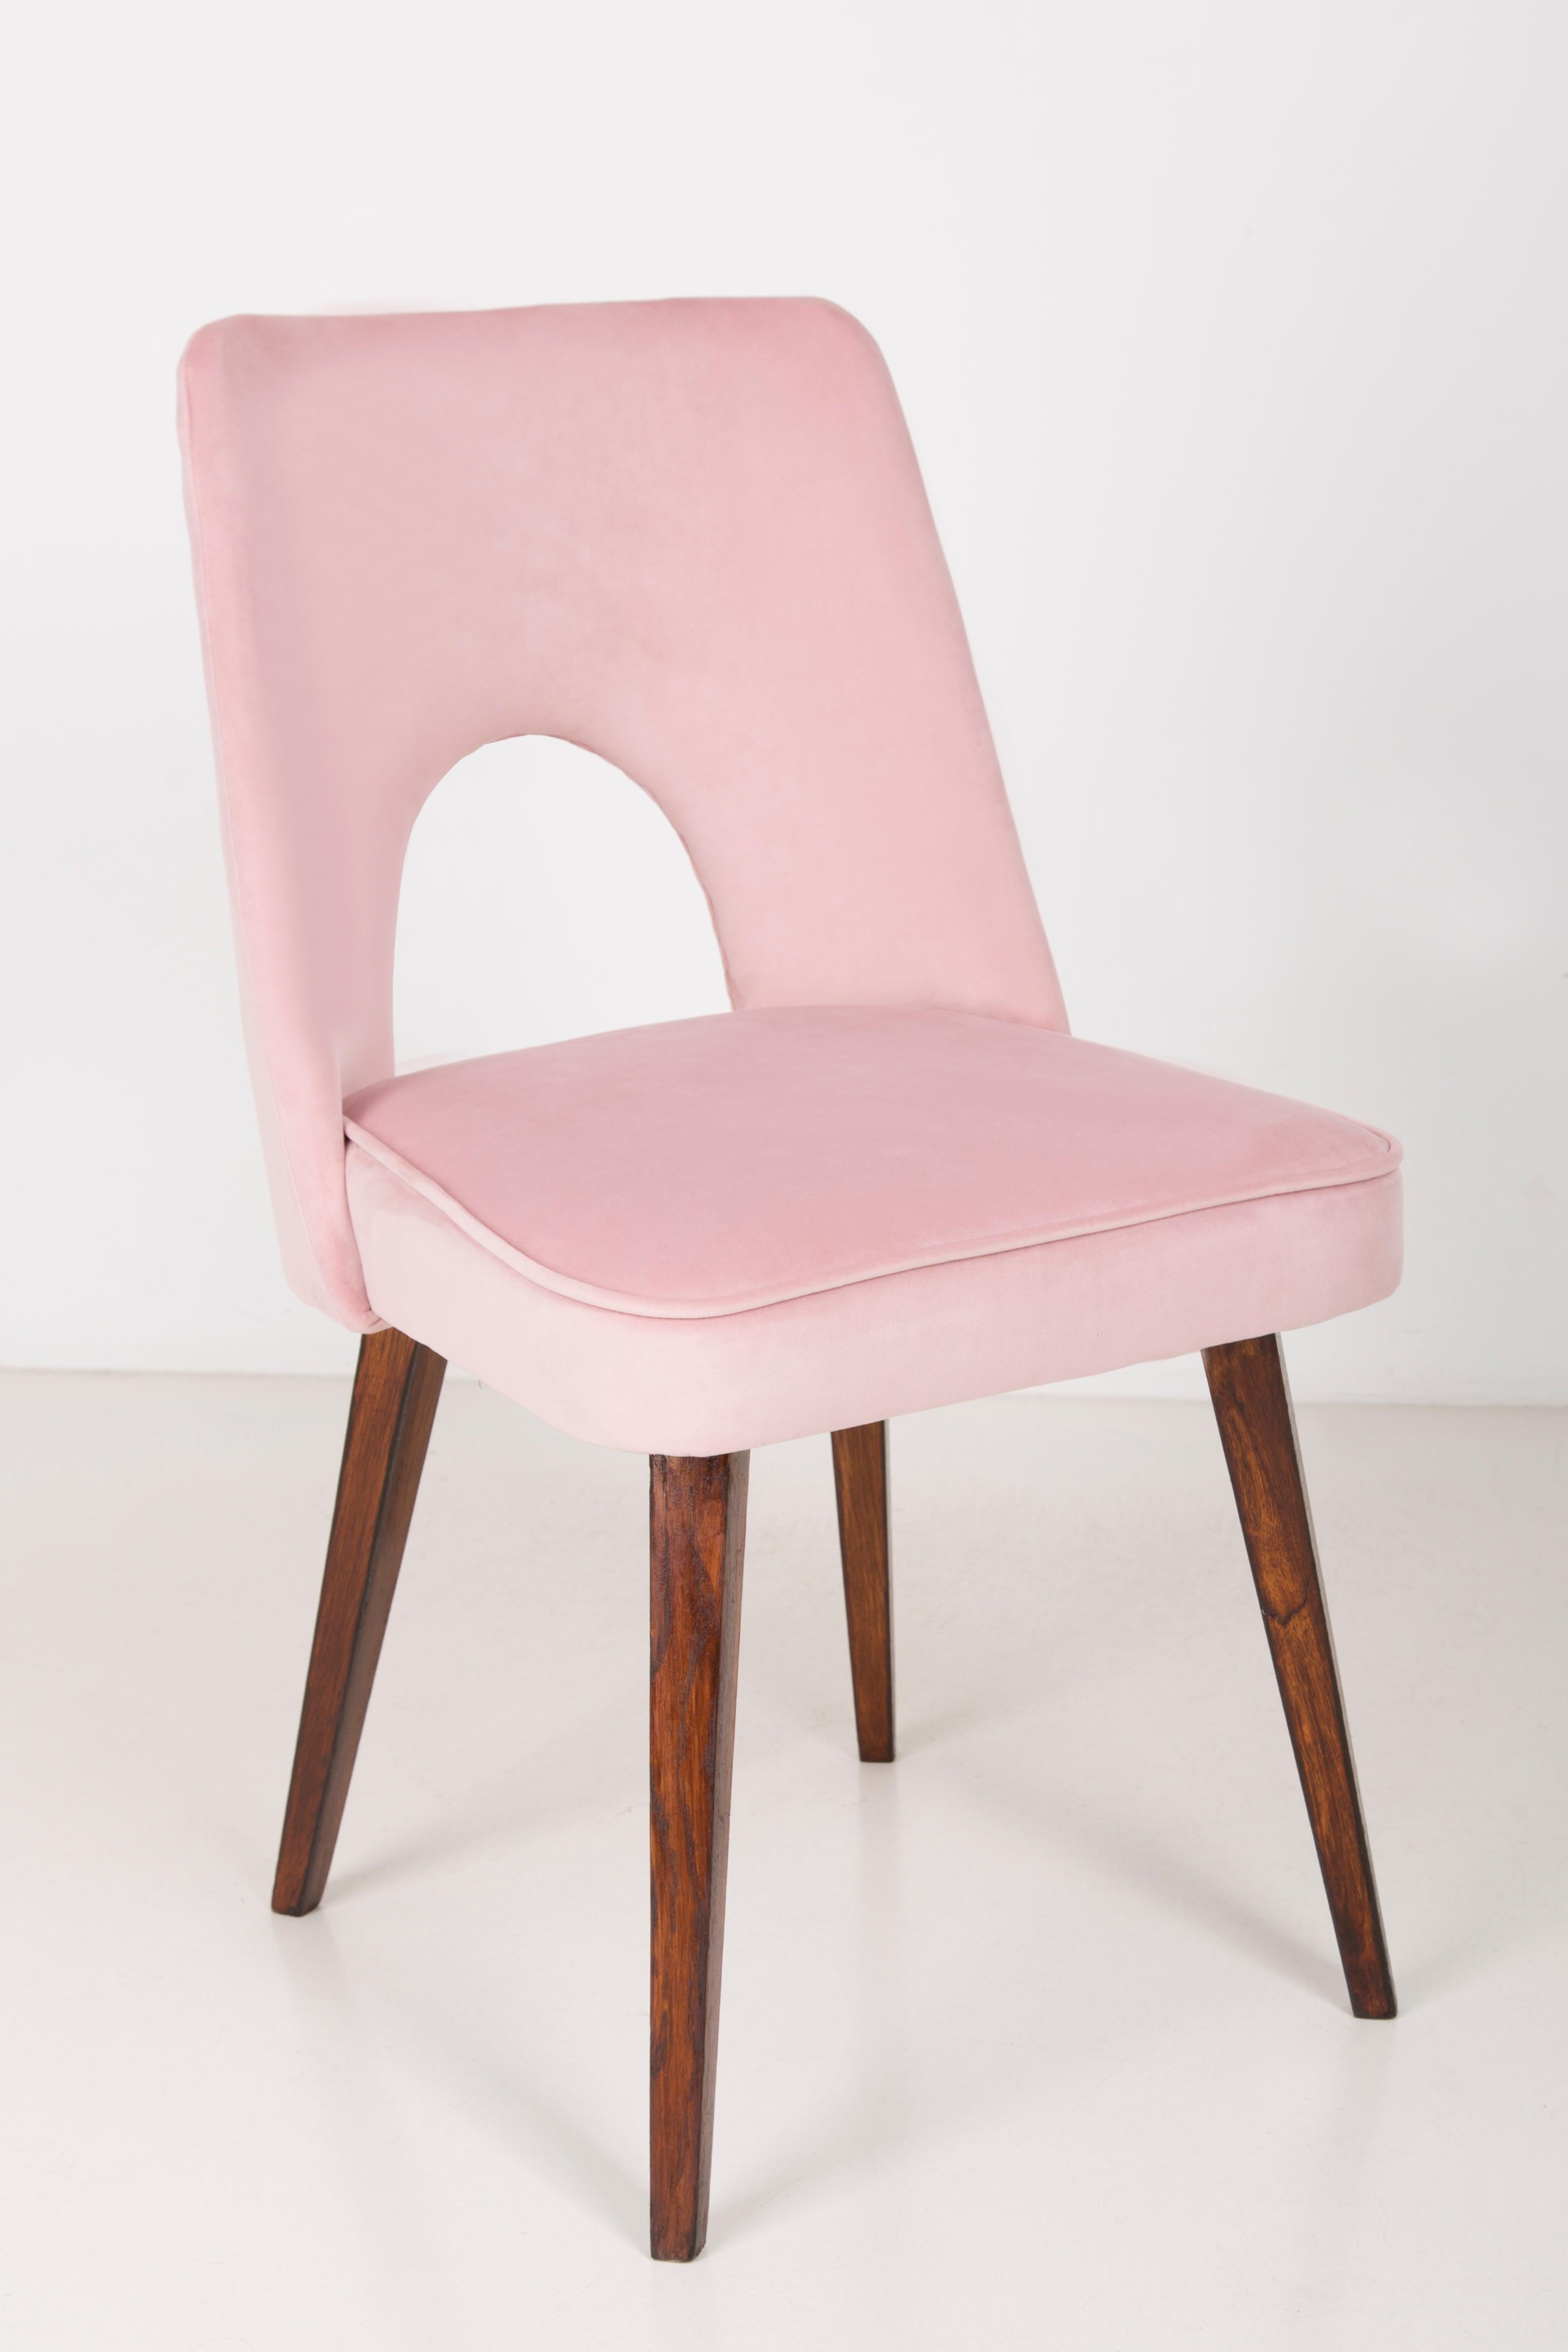 Set of Six Baby Pink Velvet 'Shell' Chairs, 1960s For Sale 1